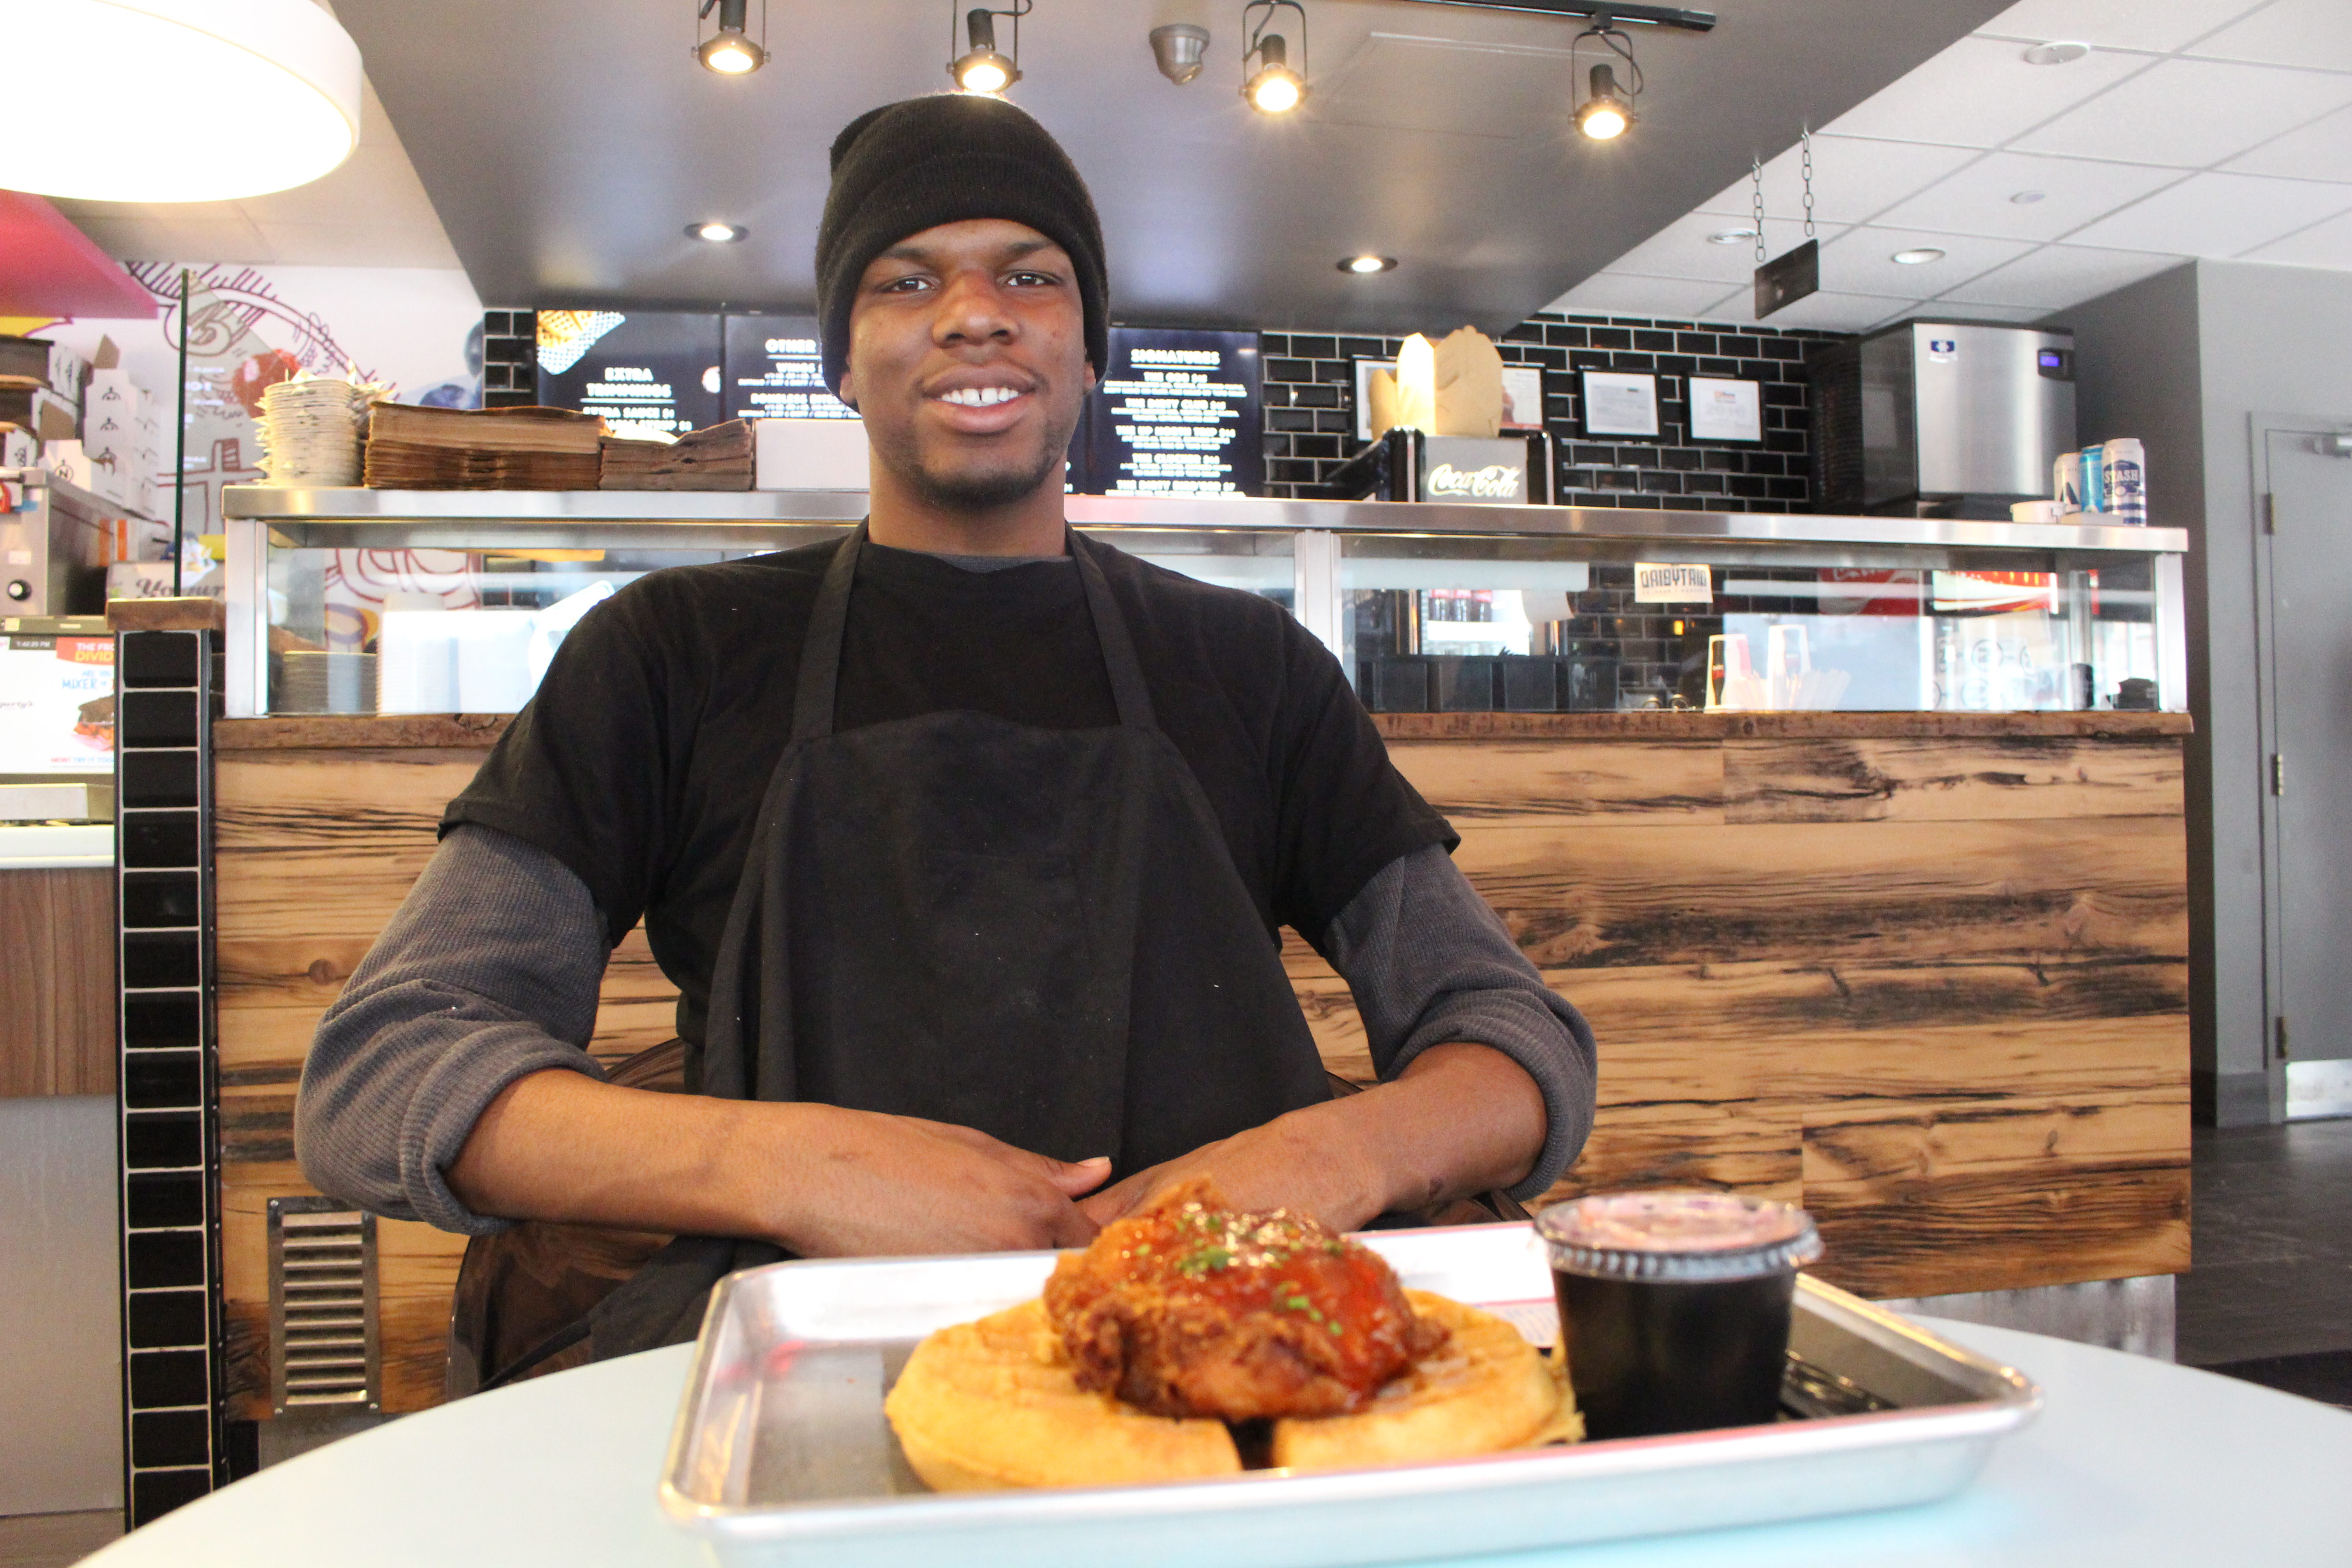 Cook Rashawan Farquason sitting in front of chicken and waffles with menu in background.